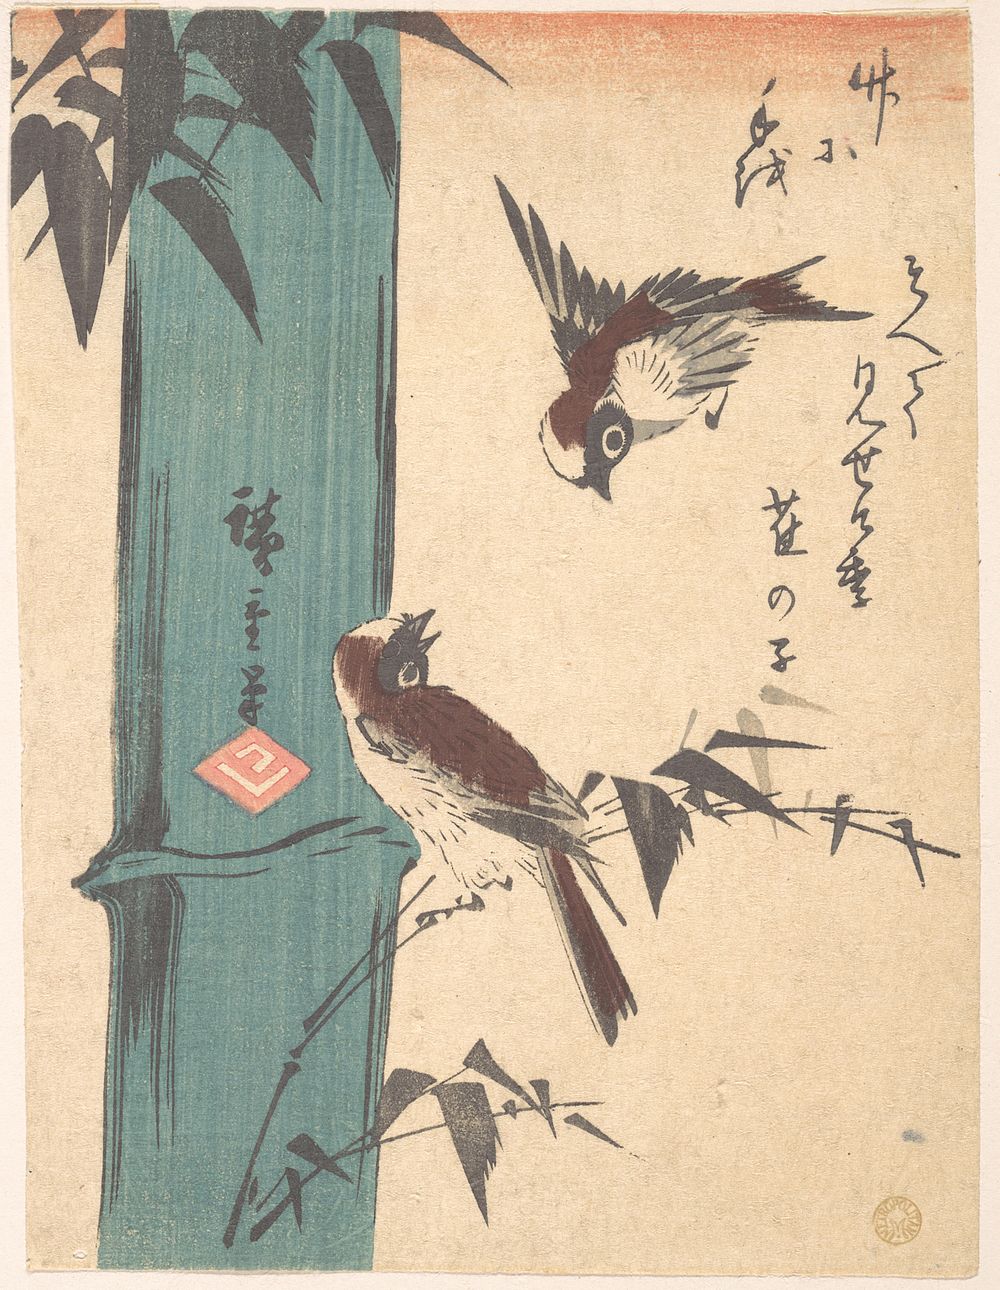 Utagawa Hiroshige (1840) Bamboo and Sparrows. Original public domain image from the MET museum.